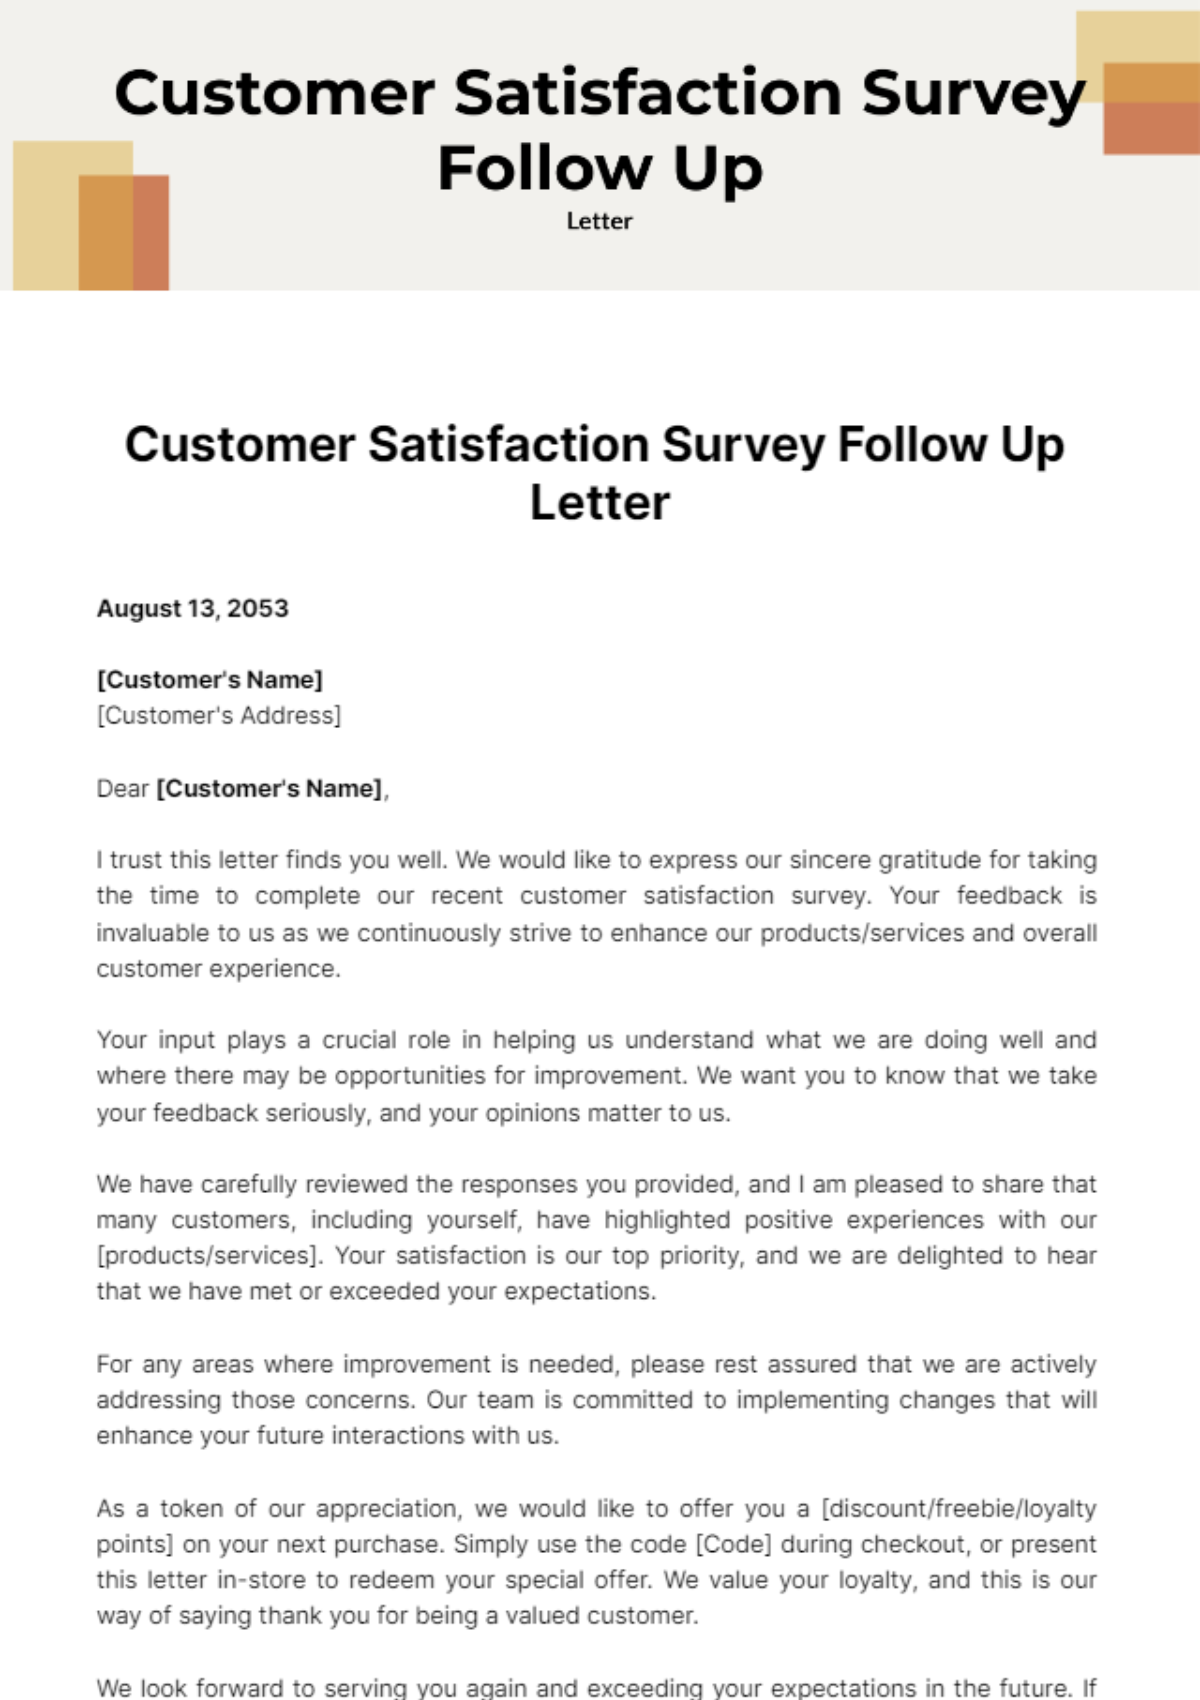 Free Customer Satisfaction Survey Follow Up Letter Template